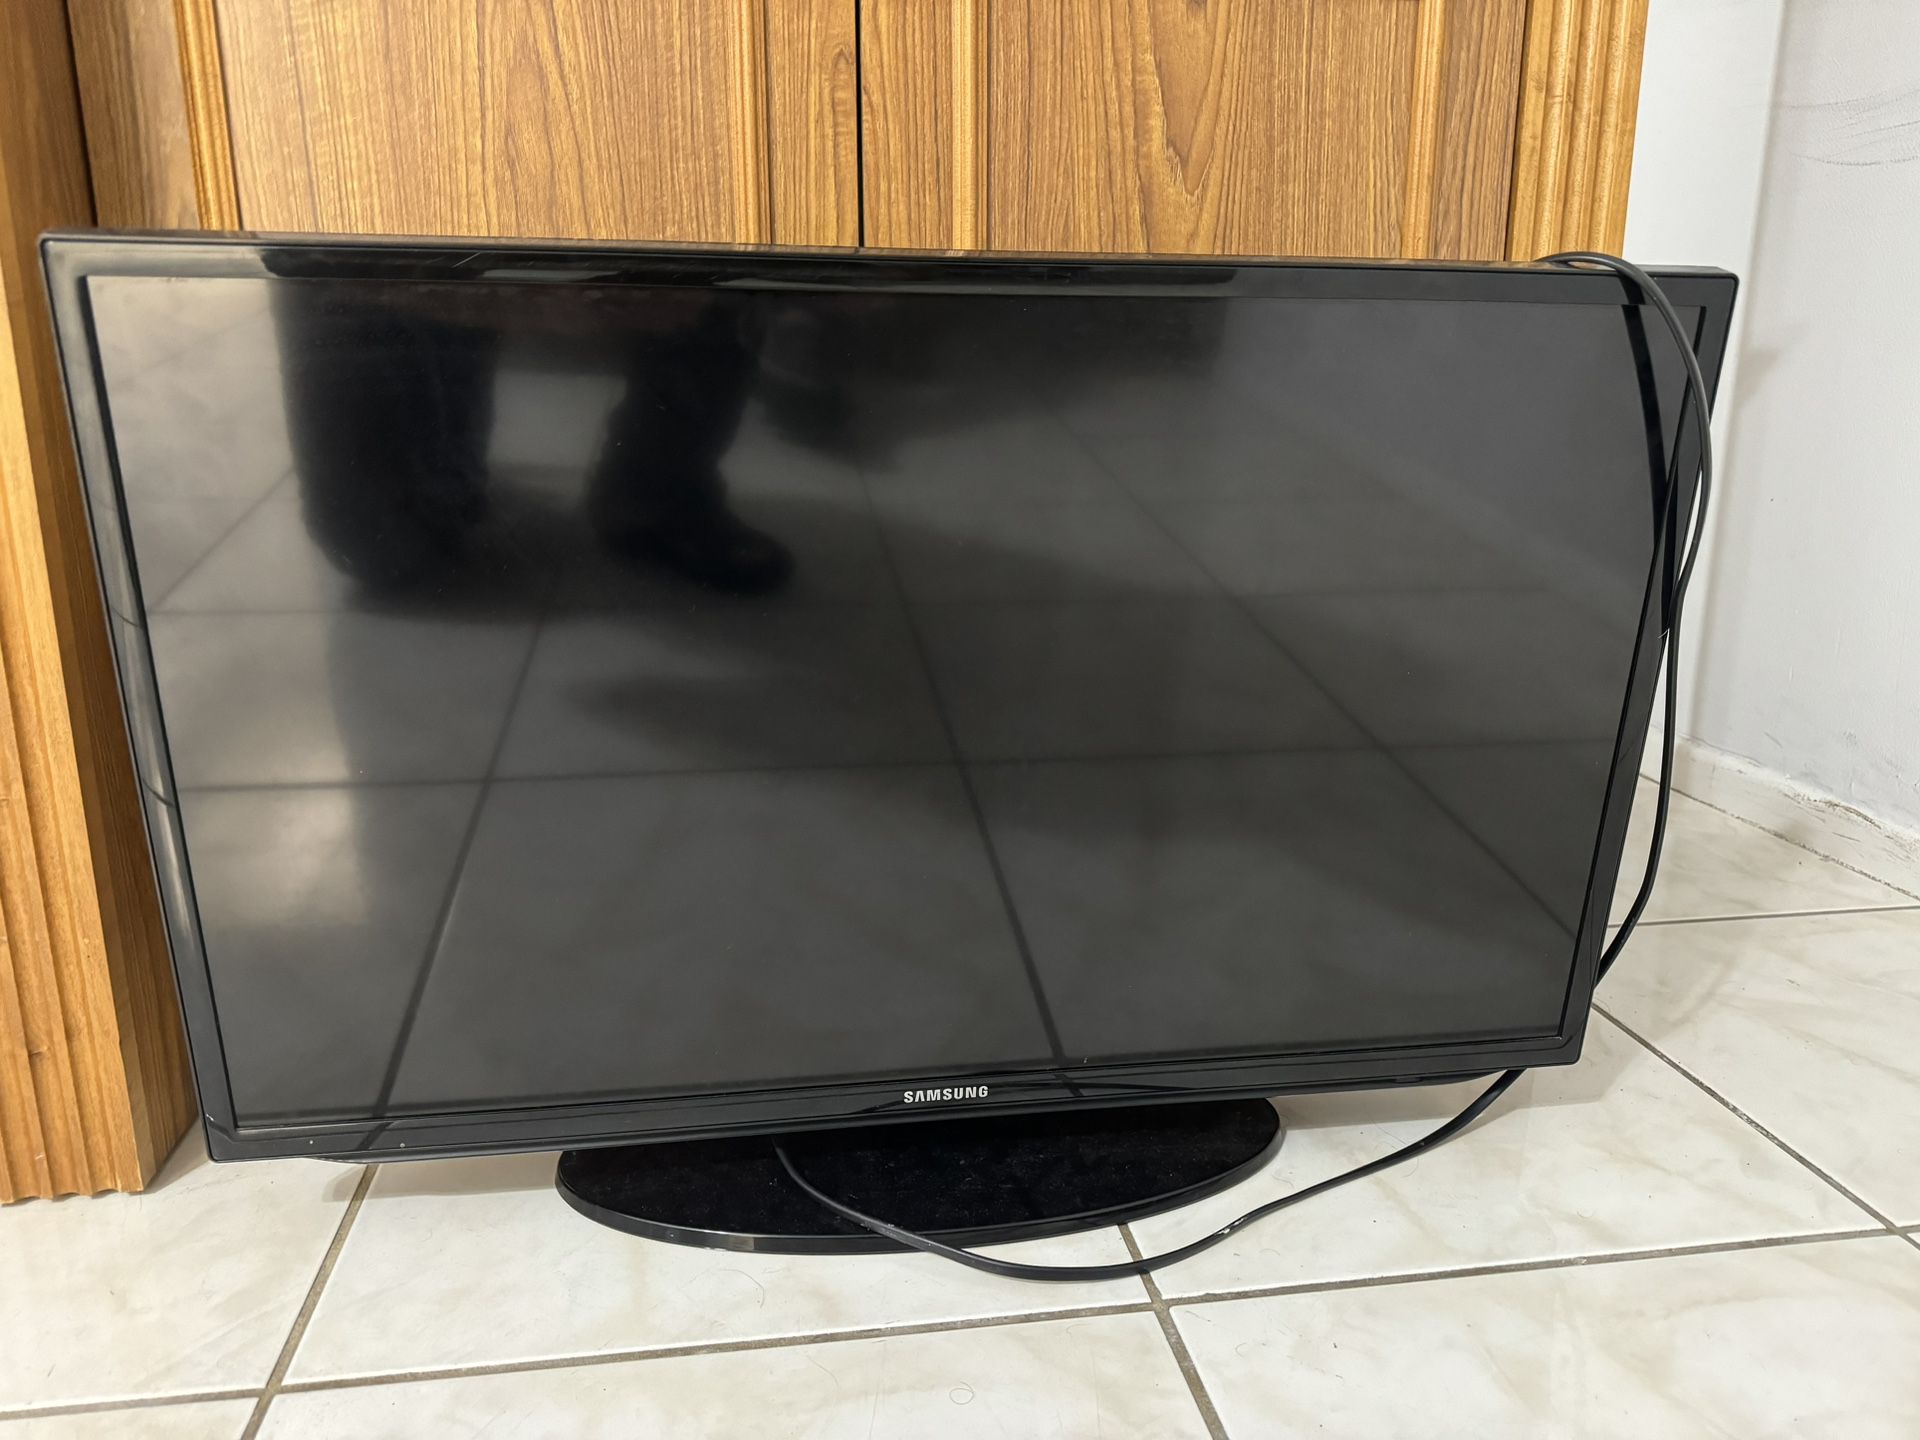 Samsung Smart TV 32 inch, With Remote Control